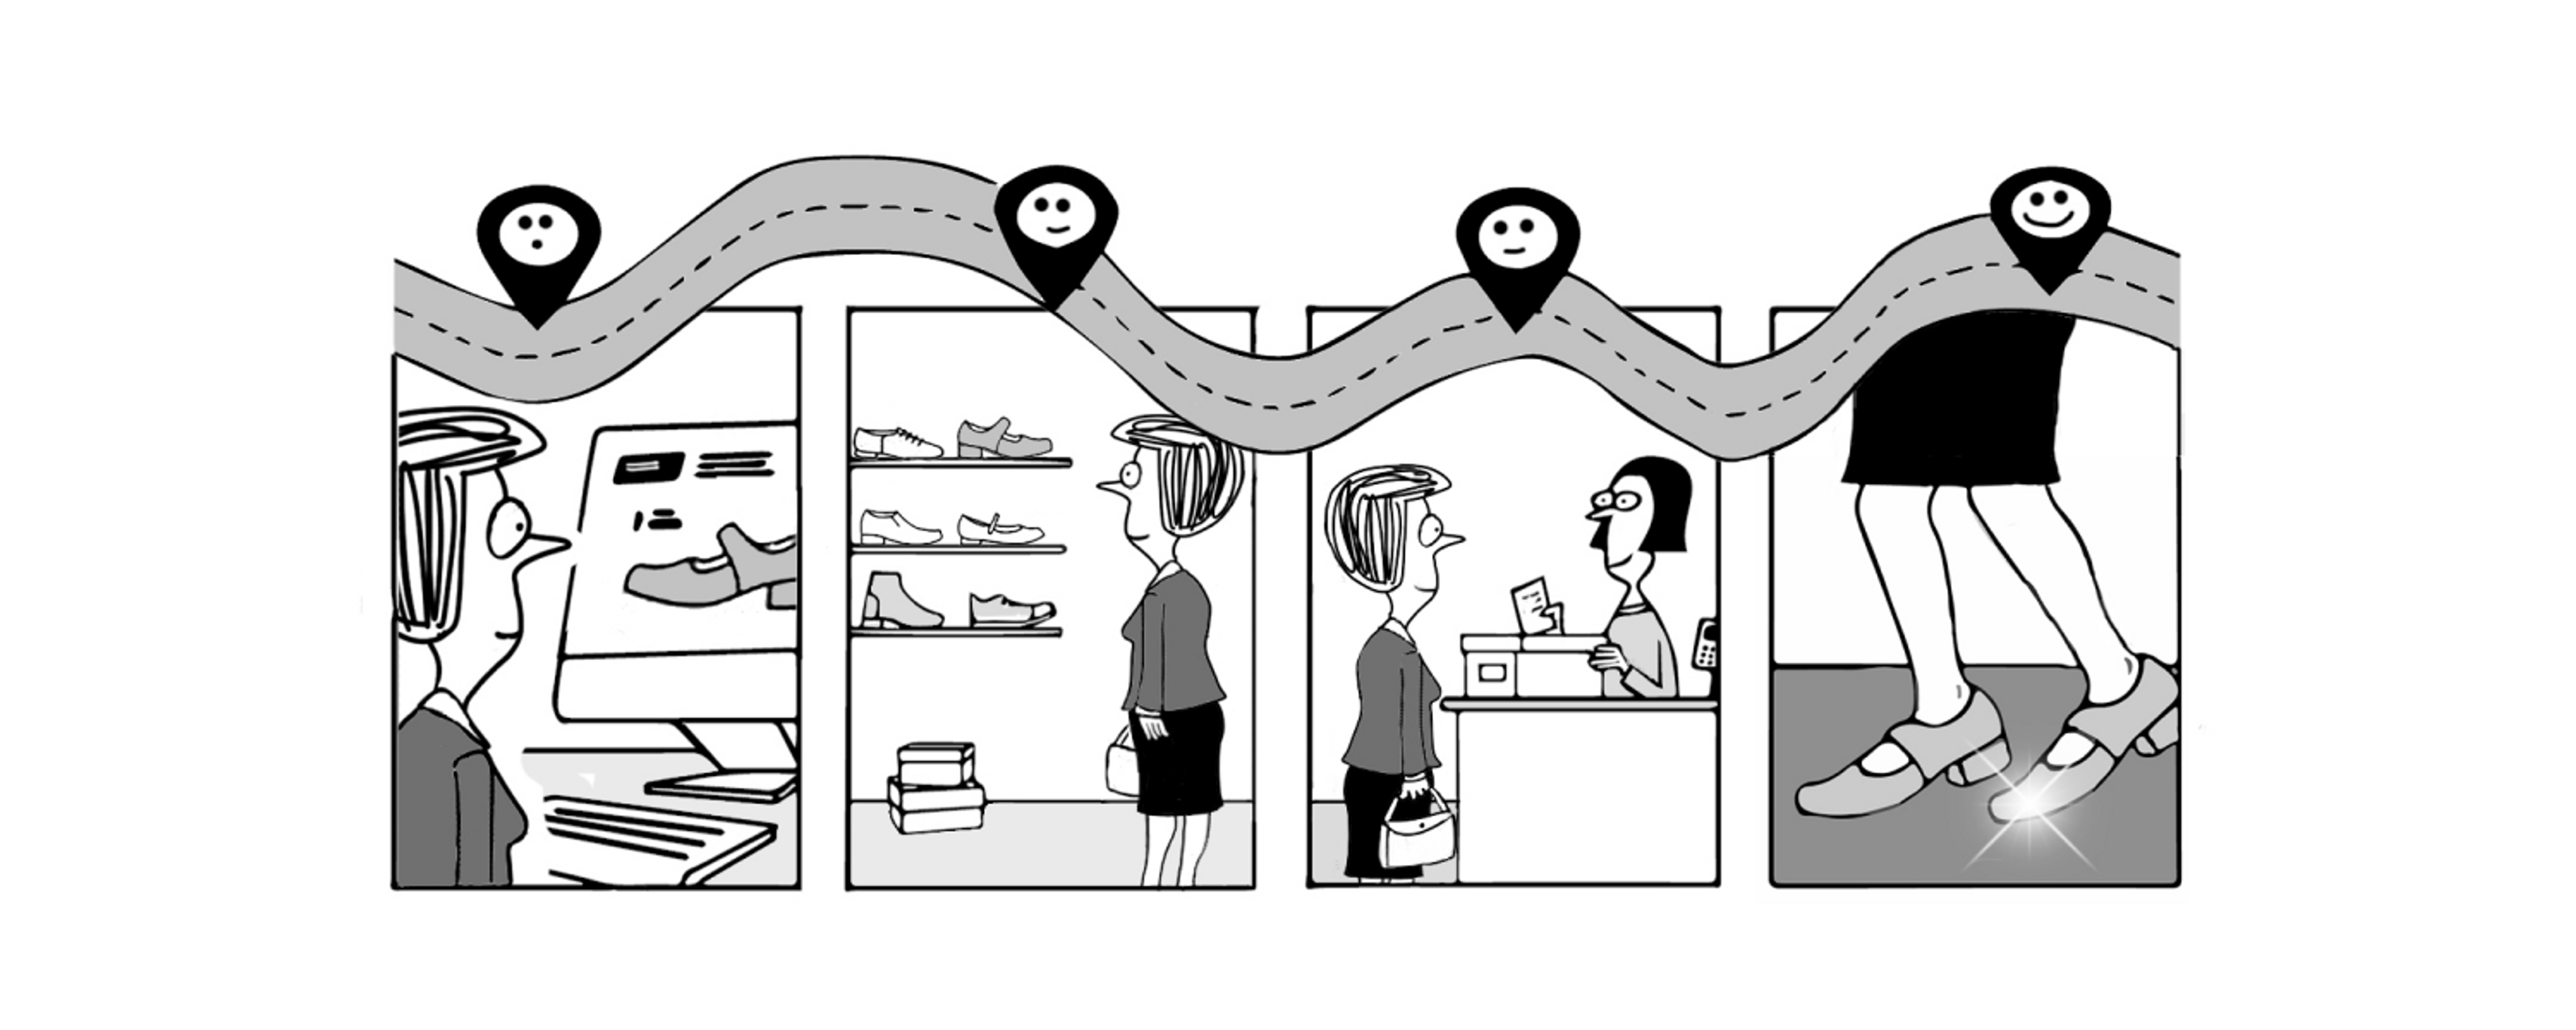 Cartoon of woman buying new shoes 